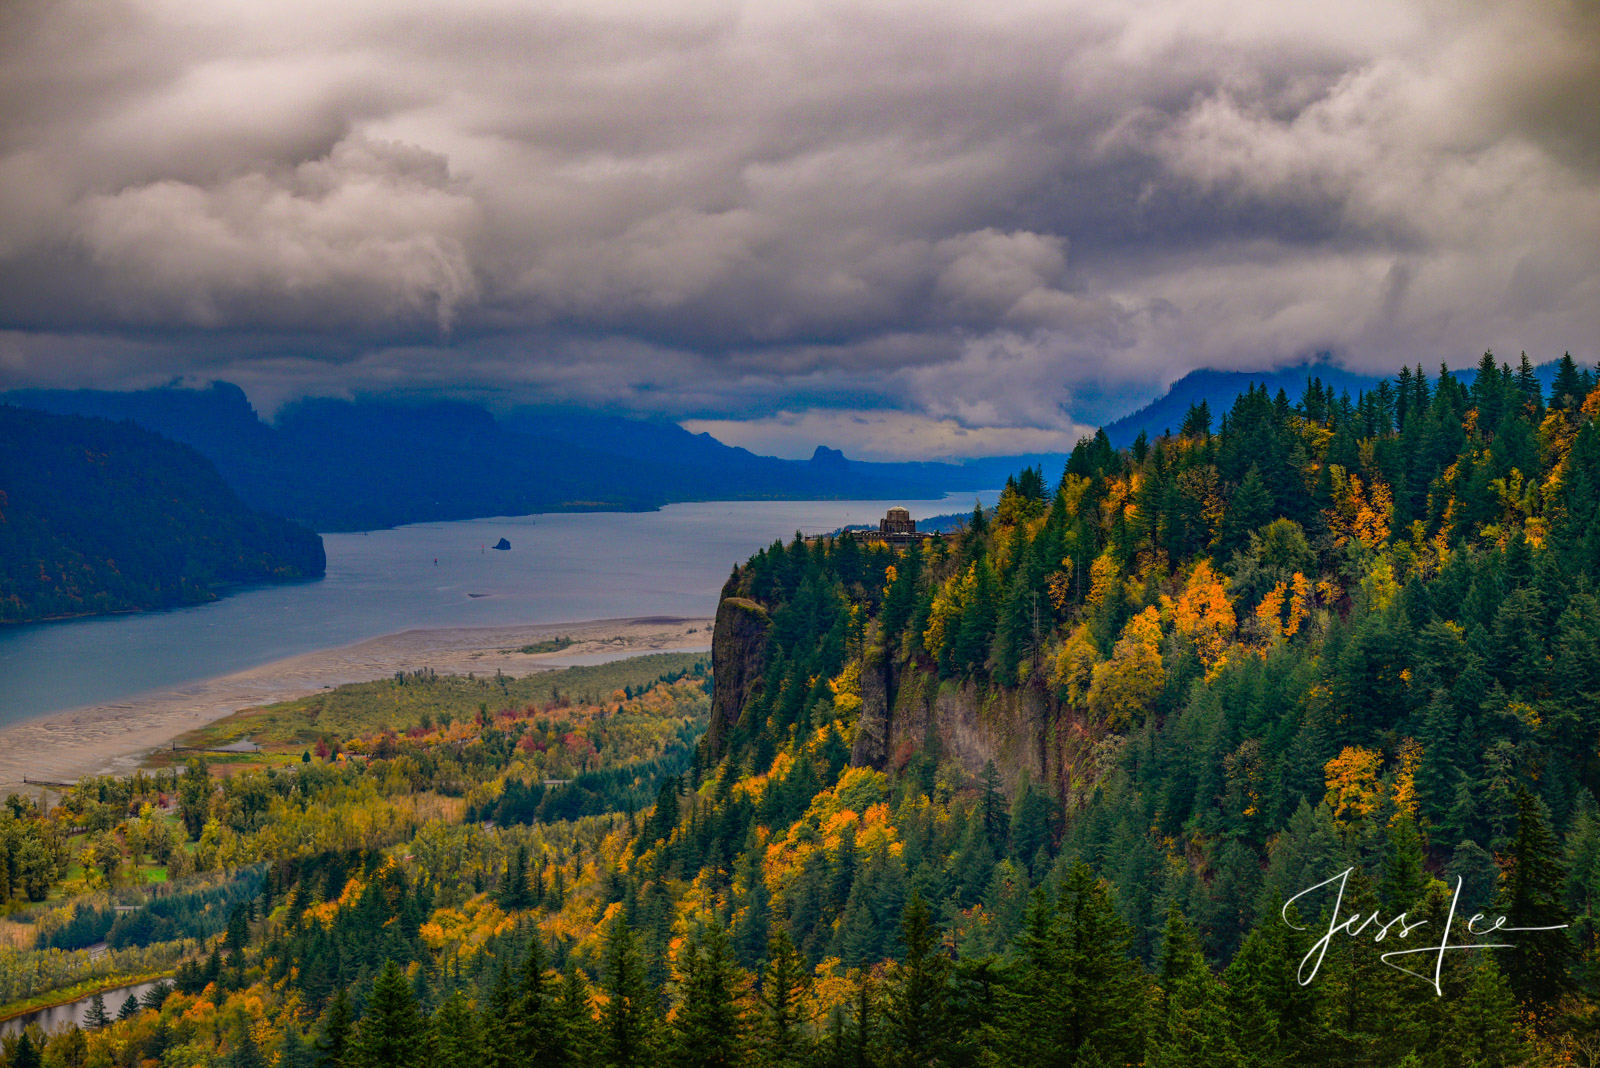 Autumn in the Gorge, a limited edition of 100 prints. Enjoy this print in your home, order today.